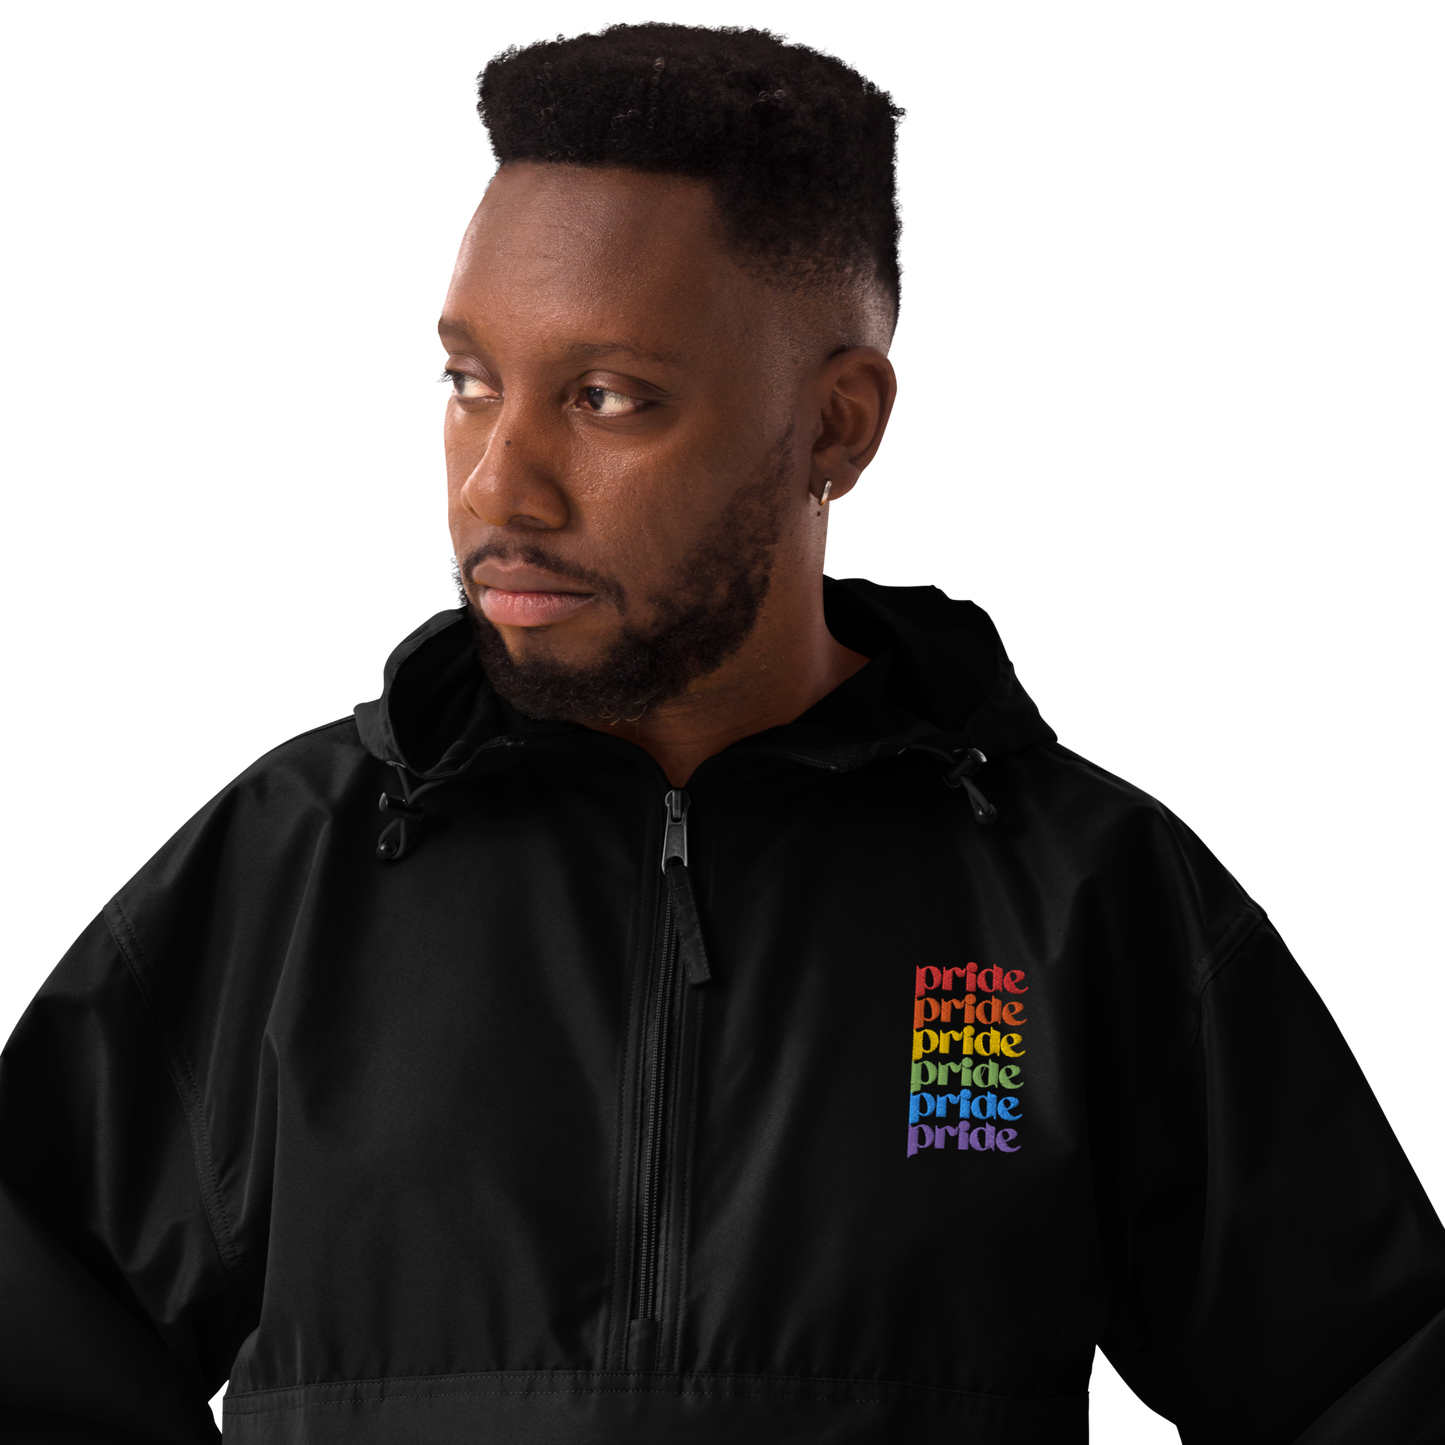 PRIDE Embroidered Champion Jacket